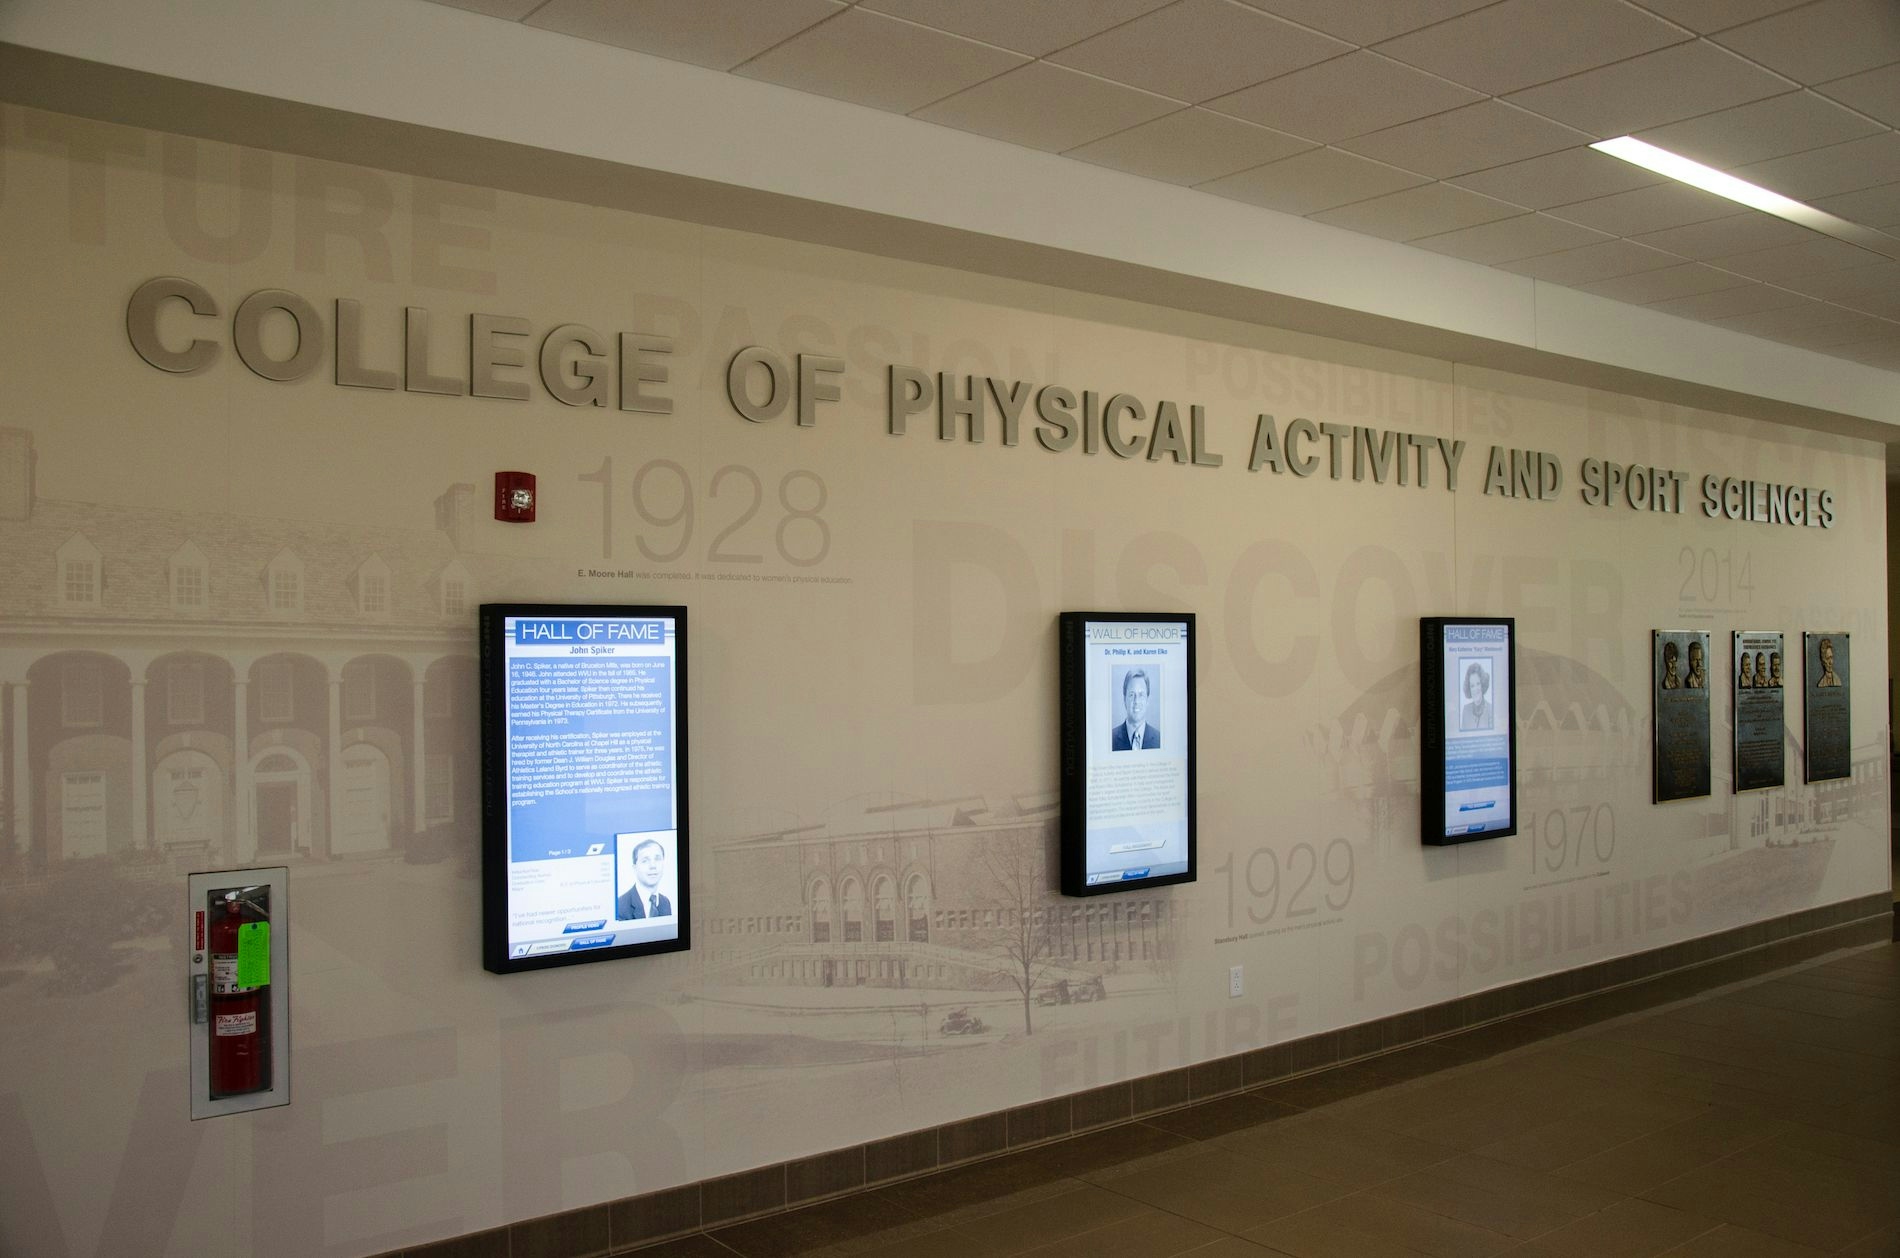 West Virginia University Utilizes (Poppulo) Software to Create a Centralized Digital Signage System